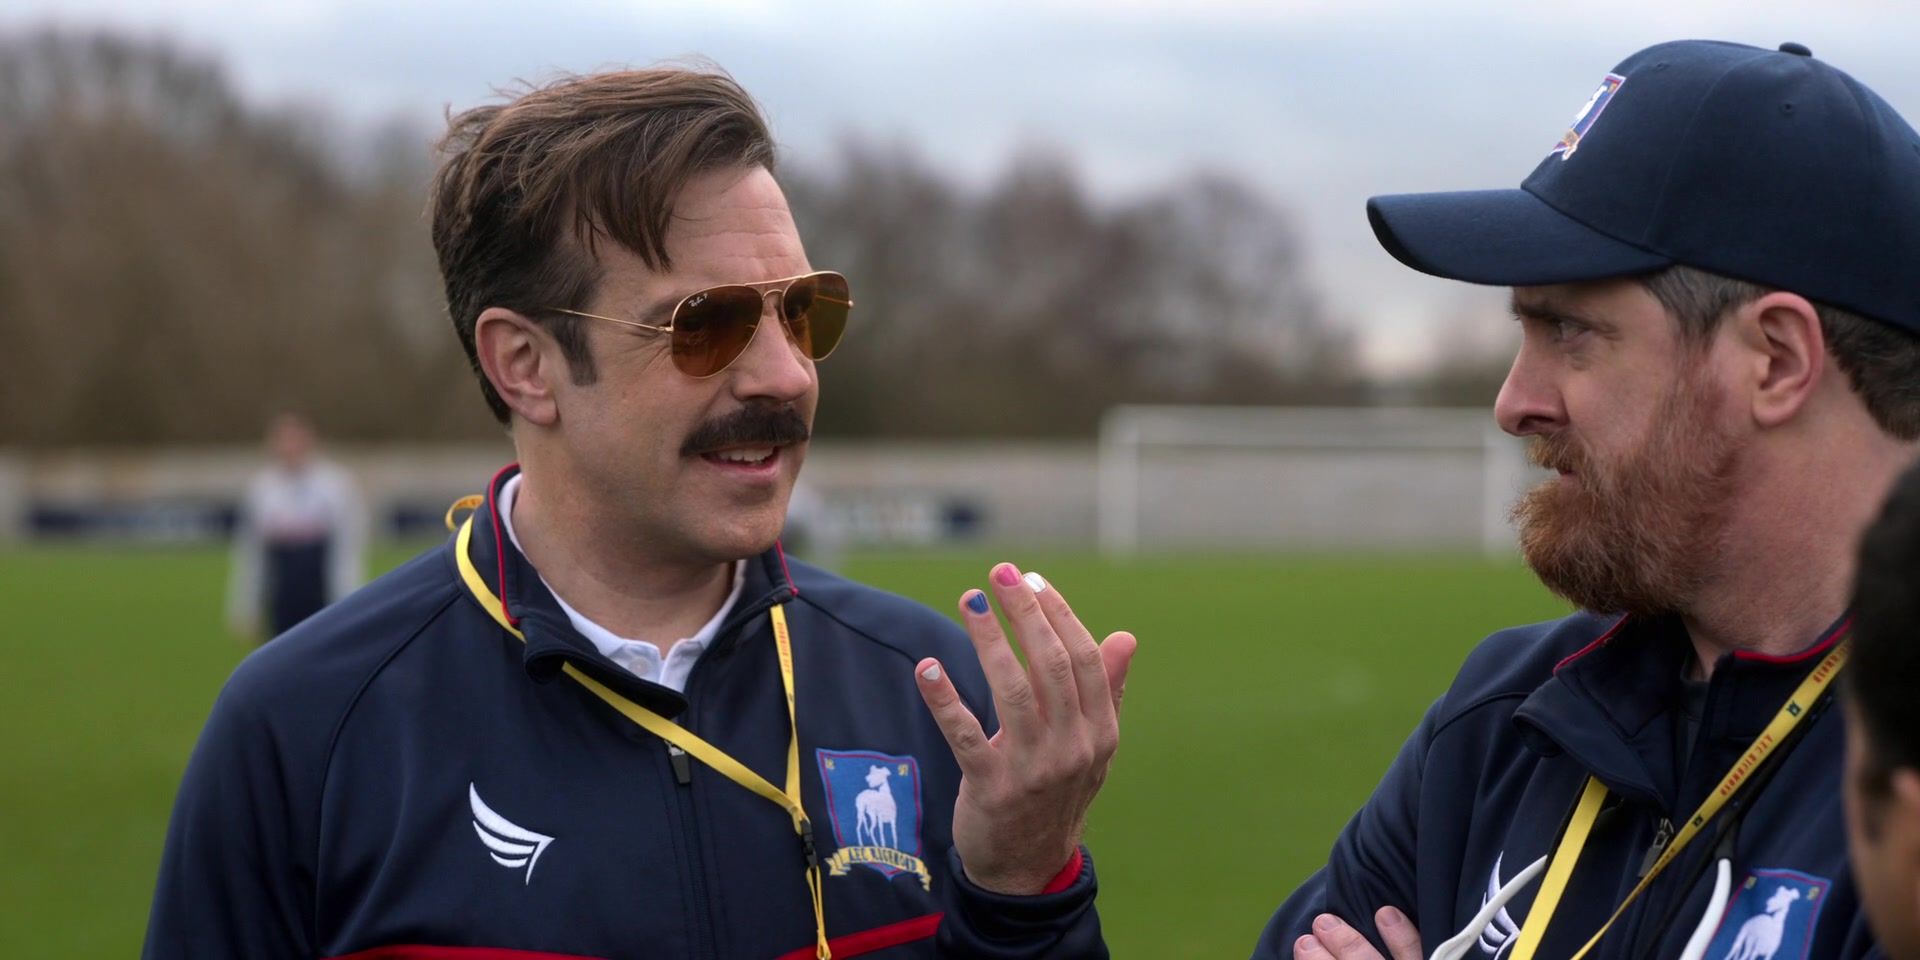 Ted Lasso inspiring quotes Jason Sudeikis nail polish with coach beard on the field